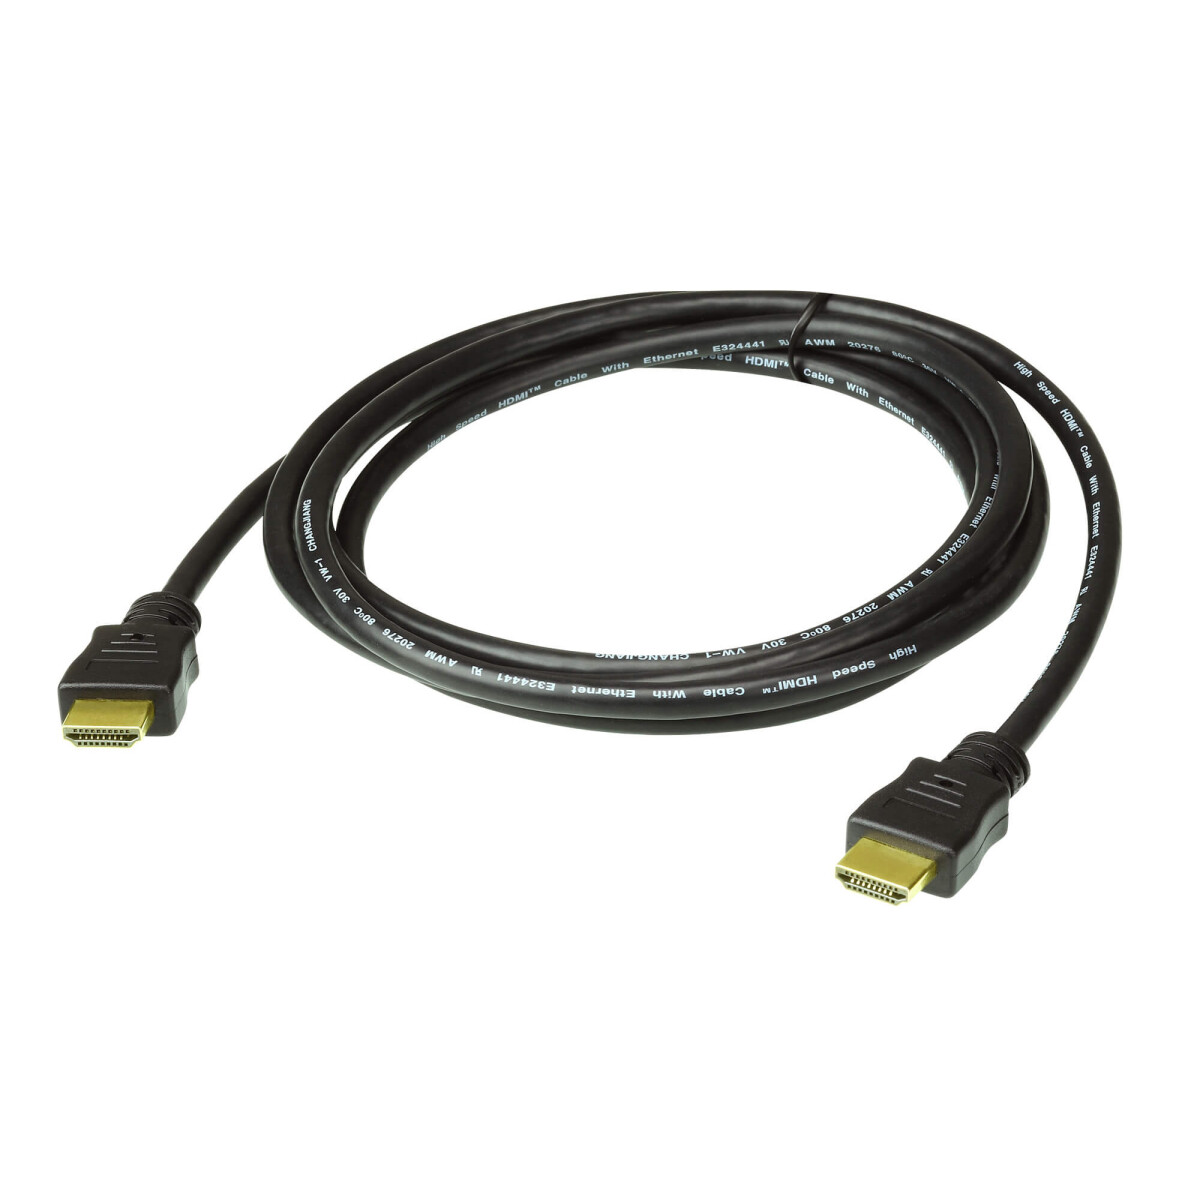 ATEN 2L-7D05H HDMI cable, HDMI High Speed with Ethernet, 5m